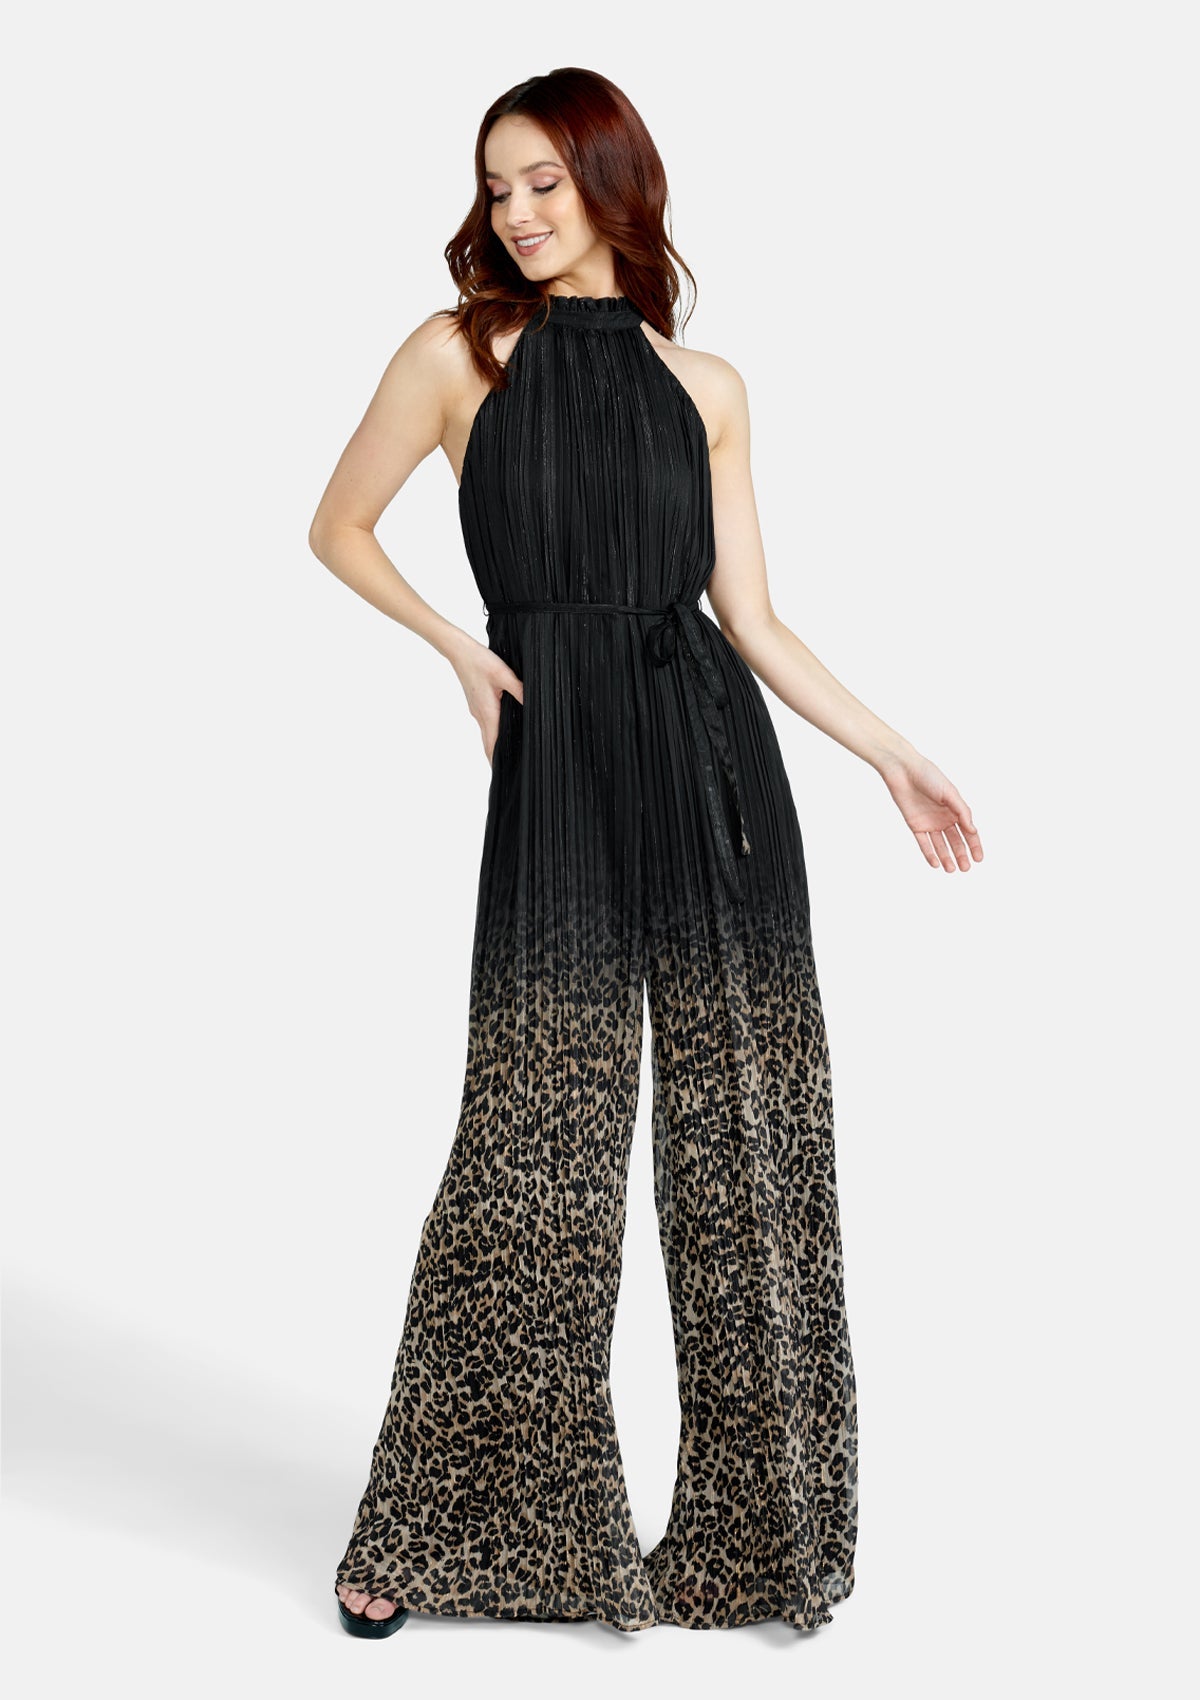 Alloy Apparel Tall Desiree Pleated Jumpsuit for Women in Leopard Size S | Polyester